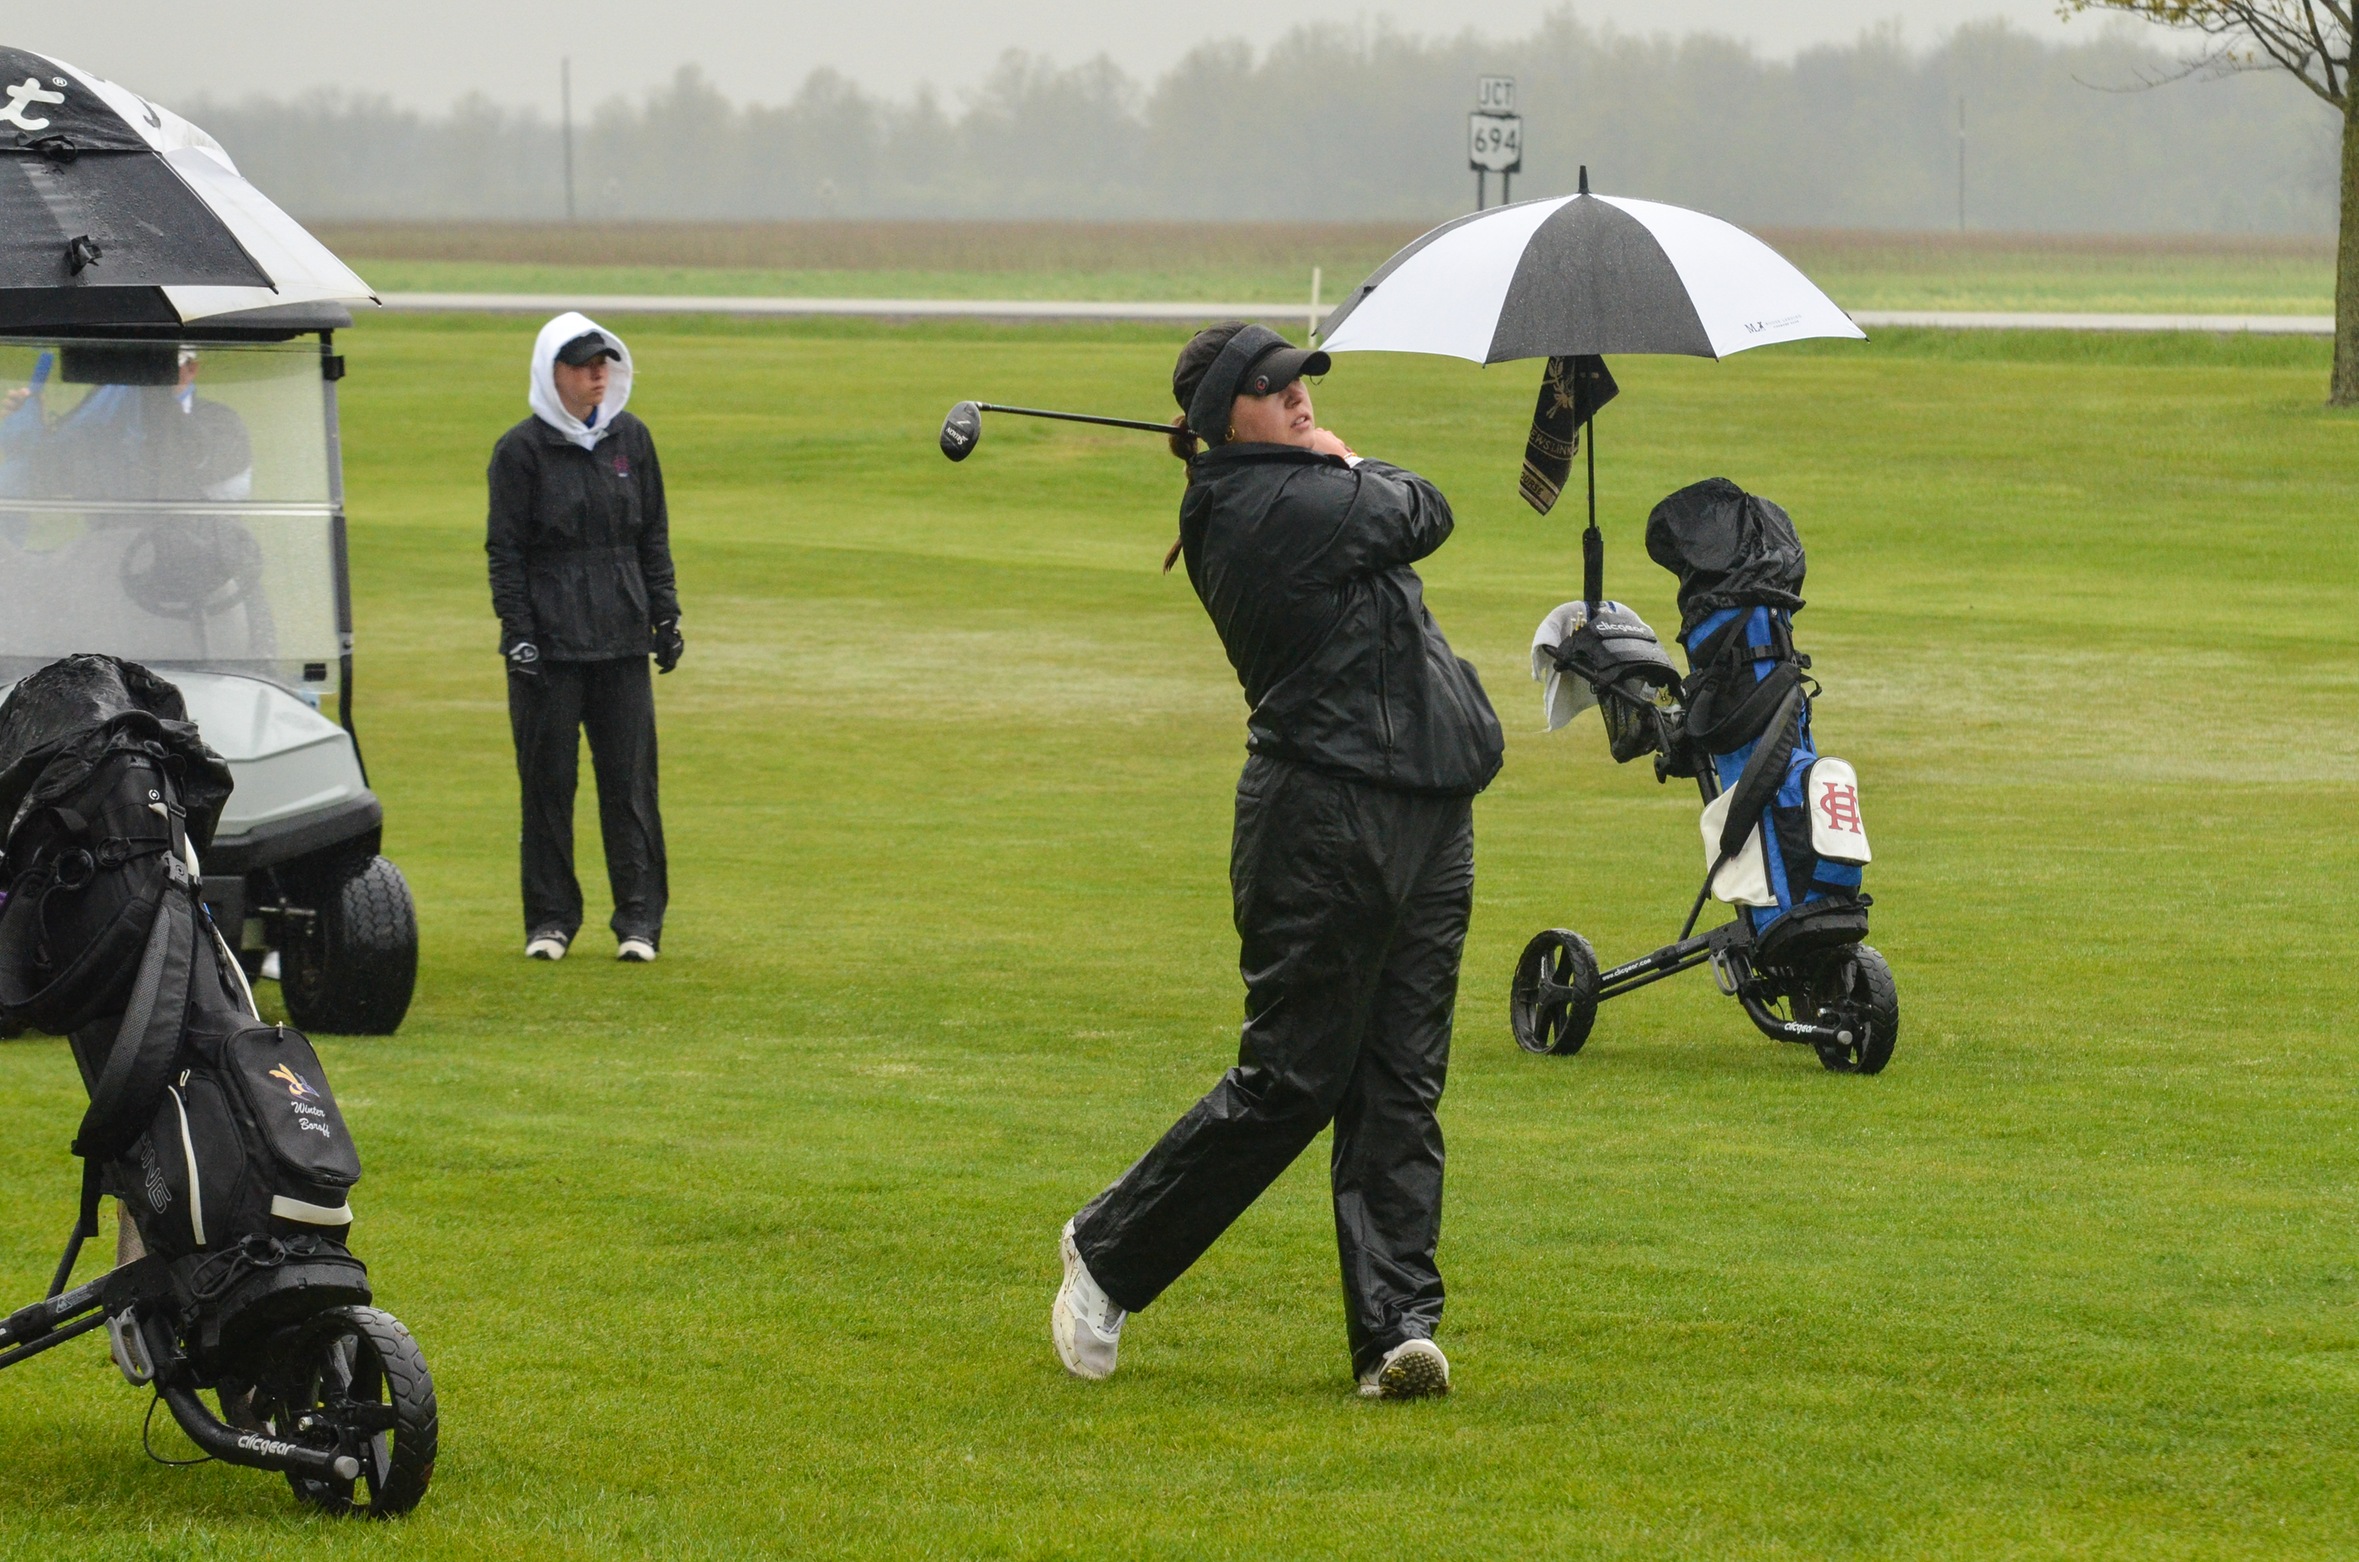 HCAC Women’s Golf Championships open on soggy day at Moose Landing